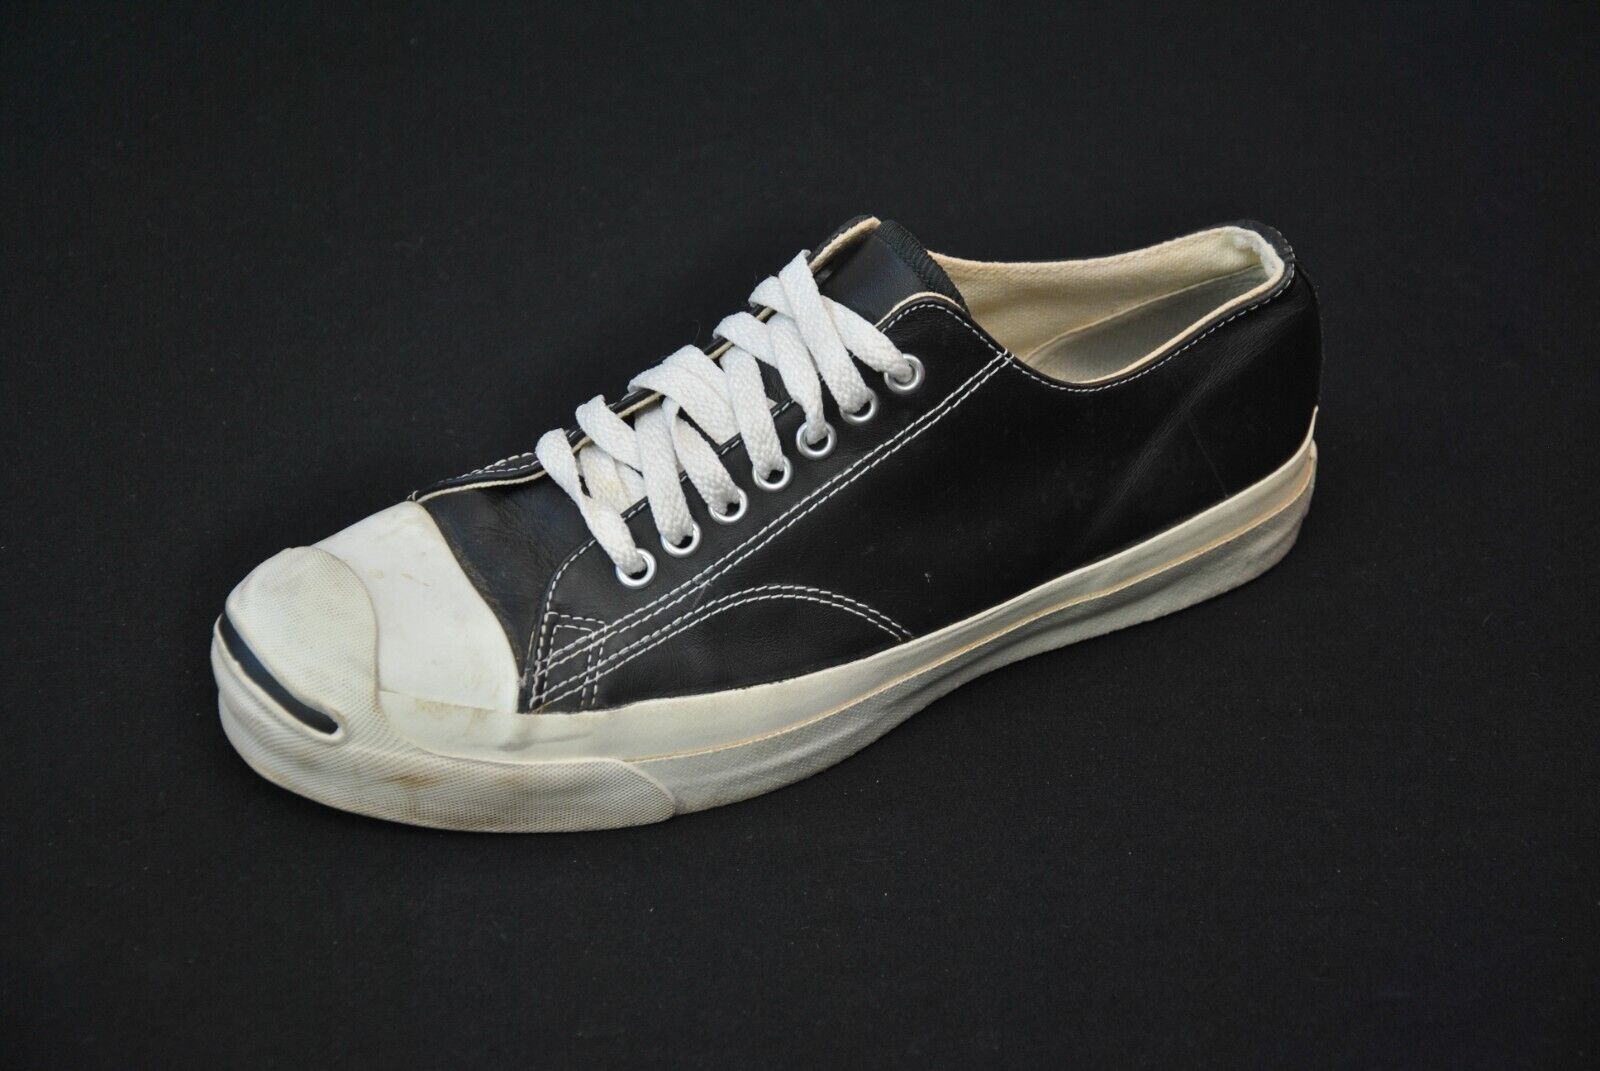 VTG Converse Jack Purcell Black Leather Shoes Men's 8.5 Made in USA 7622S